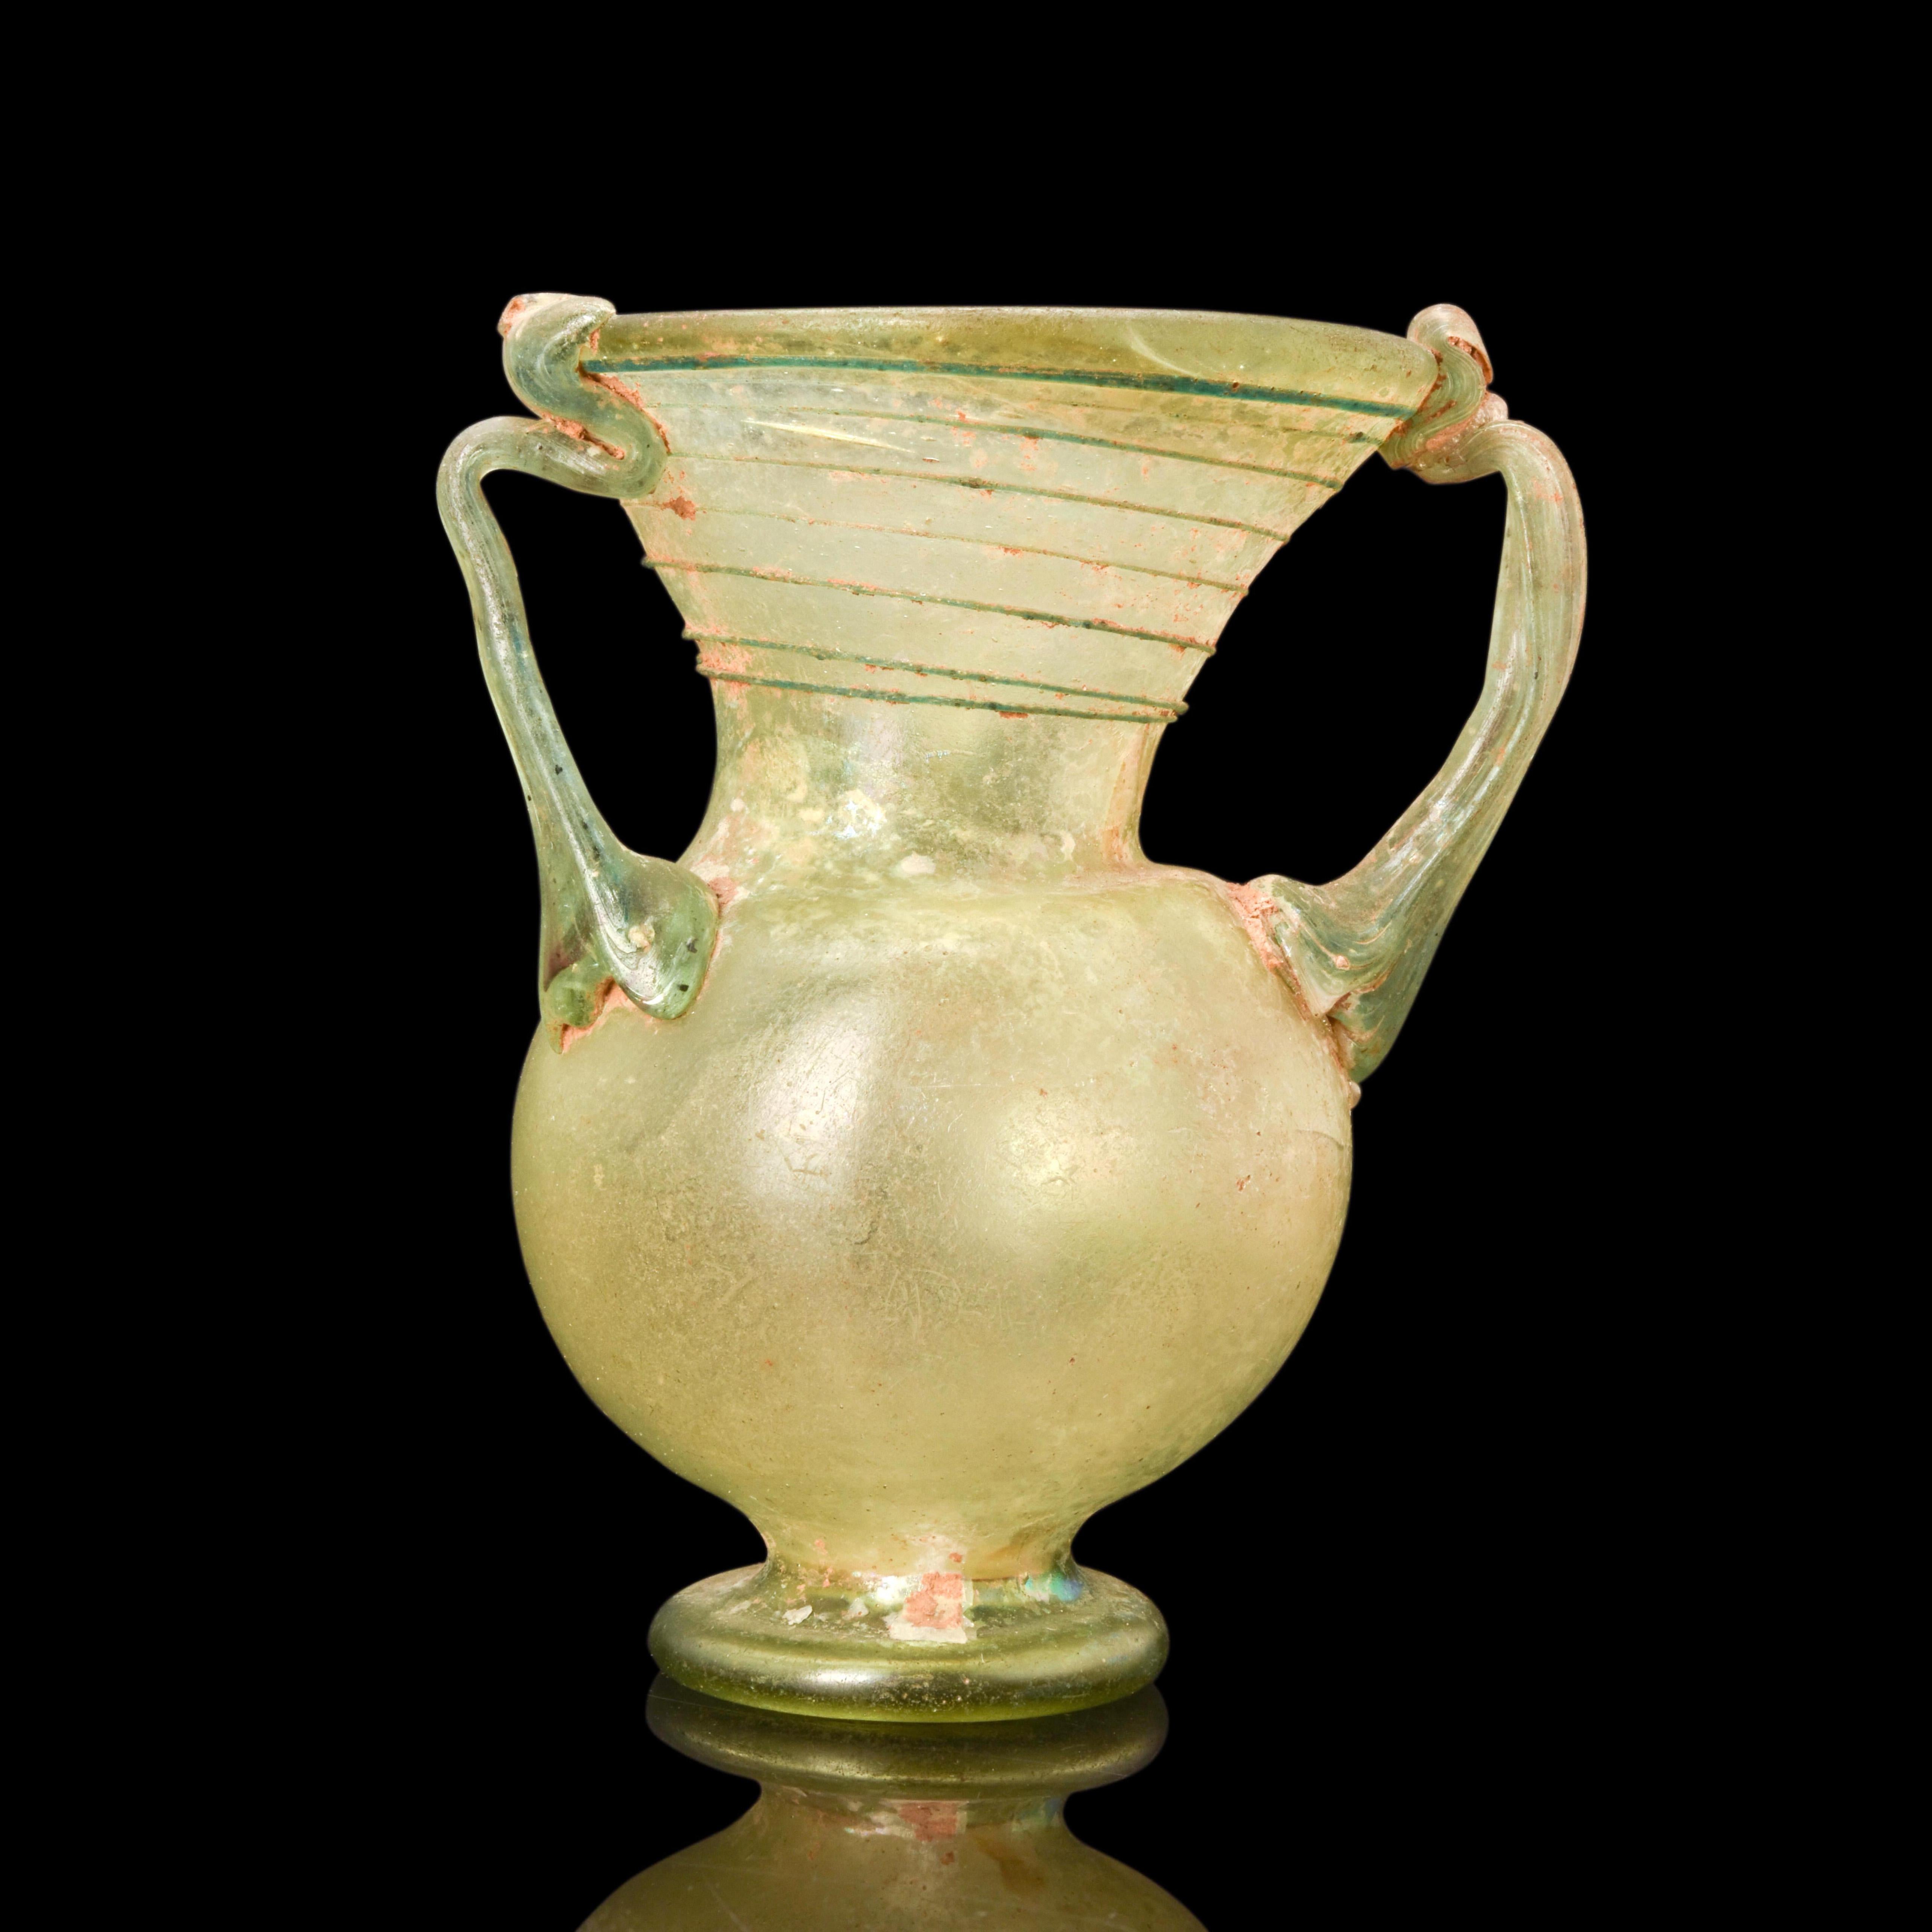 A Roman three-handled jar, blown from greenish-yellow glass. The handles and trail of the jar are rendered in a darker tint. The jar is rounded with a slightly inverted rim and wide flaring mouth tapering into the shoulder. It has a slightly